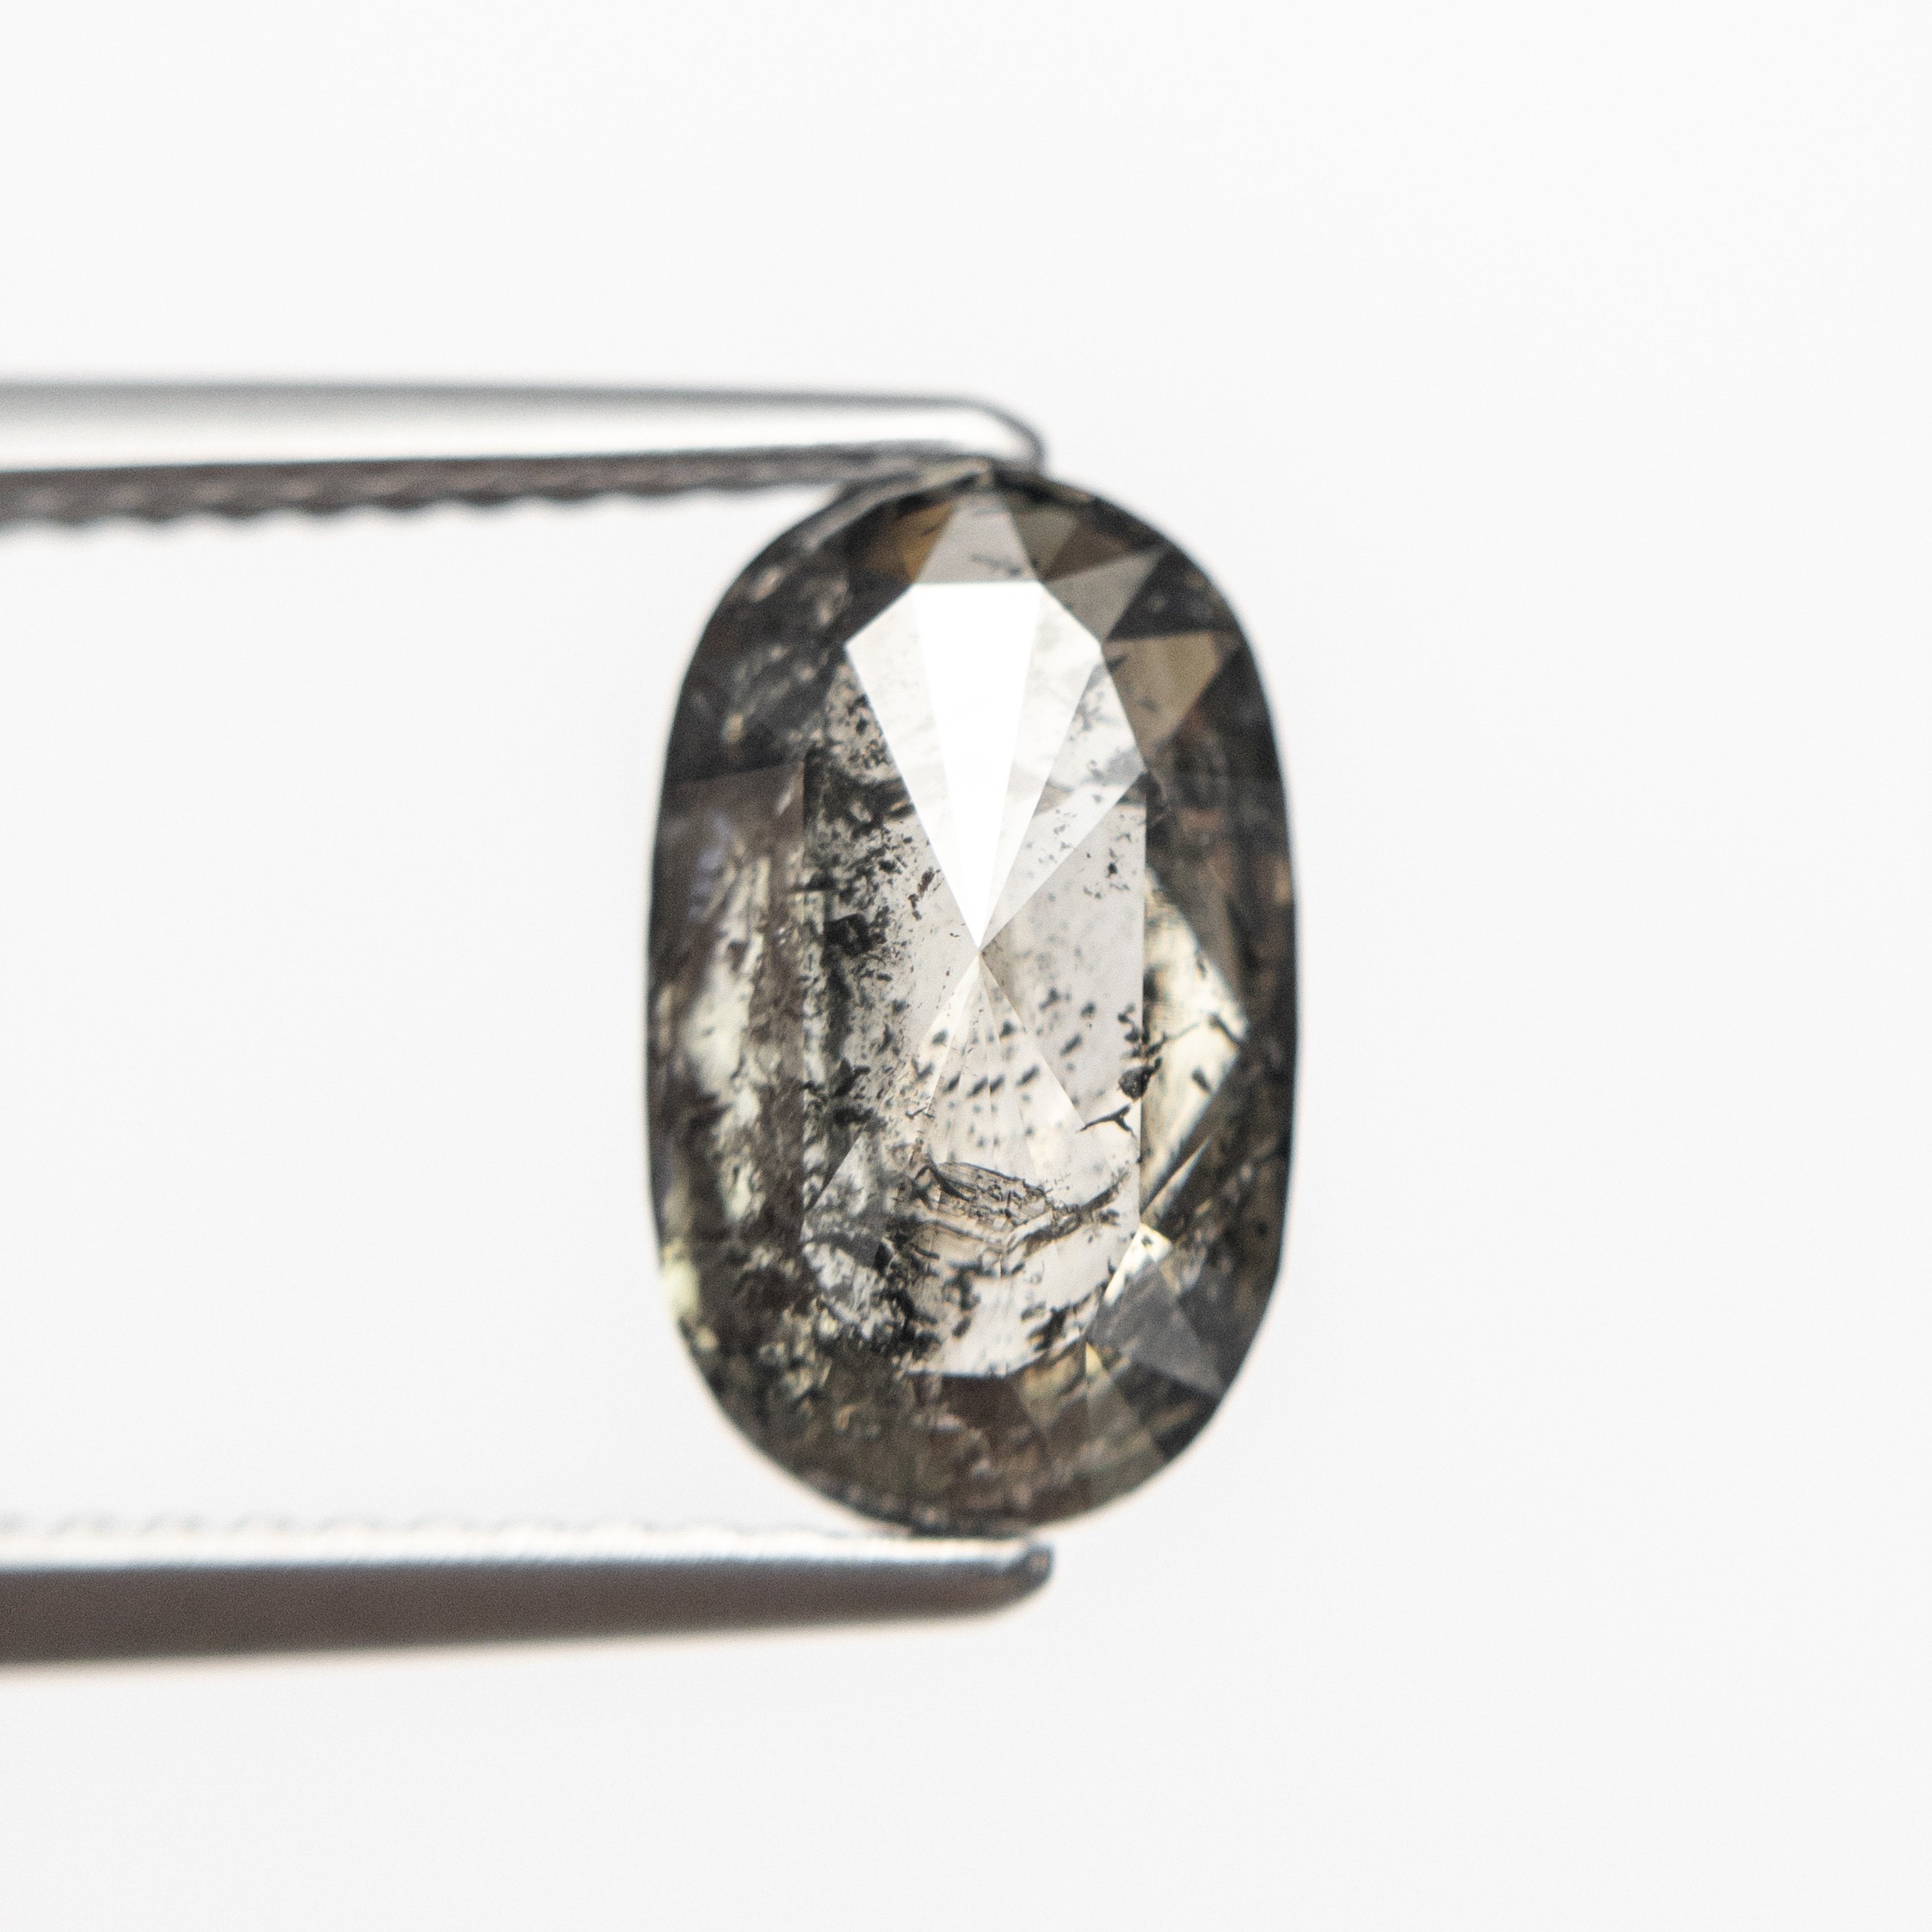 2.32ct 10.77x6.57x3.67mm Oval Double Cut 18904-04